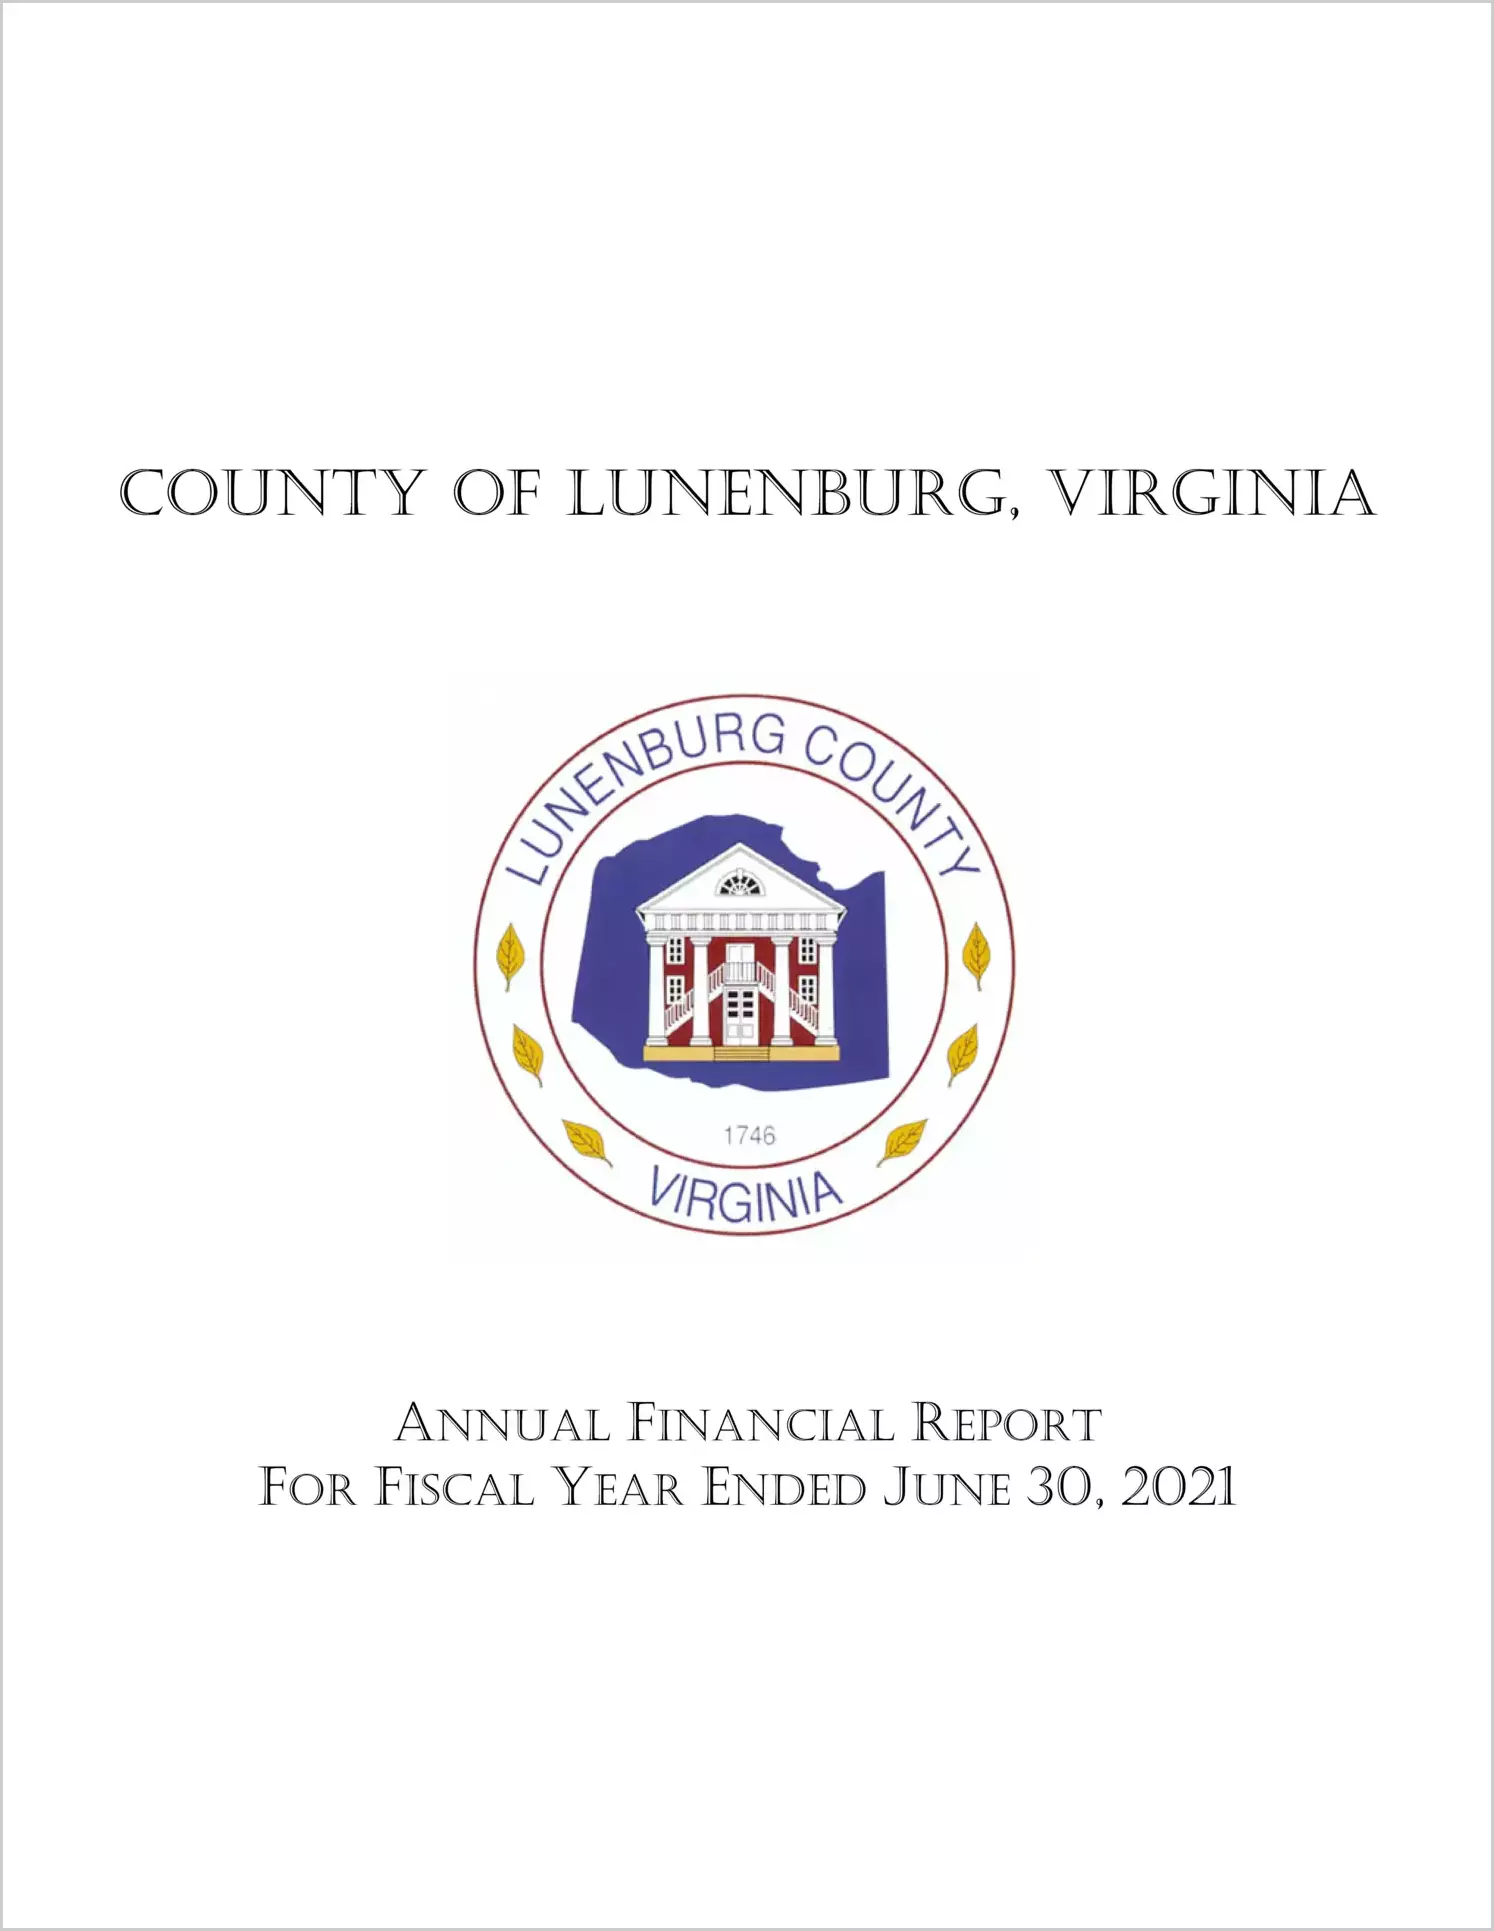 2021 Annual Financial Report for County of Lunenburg